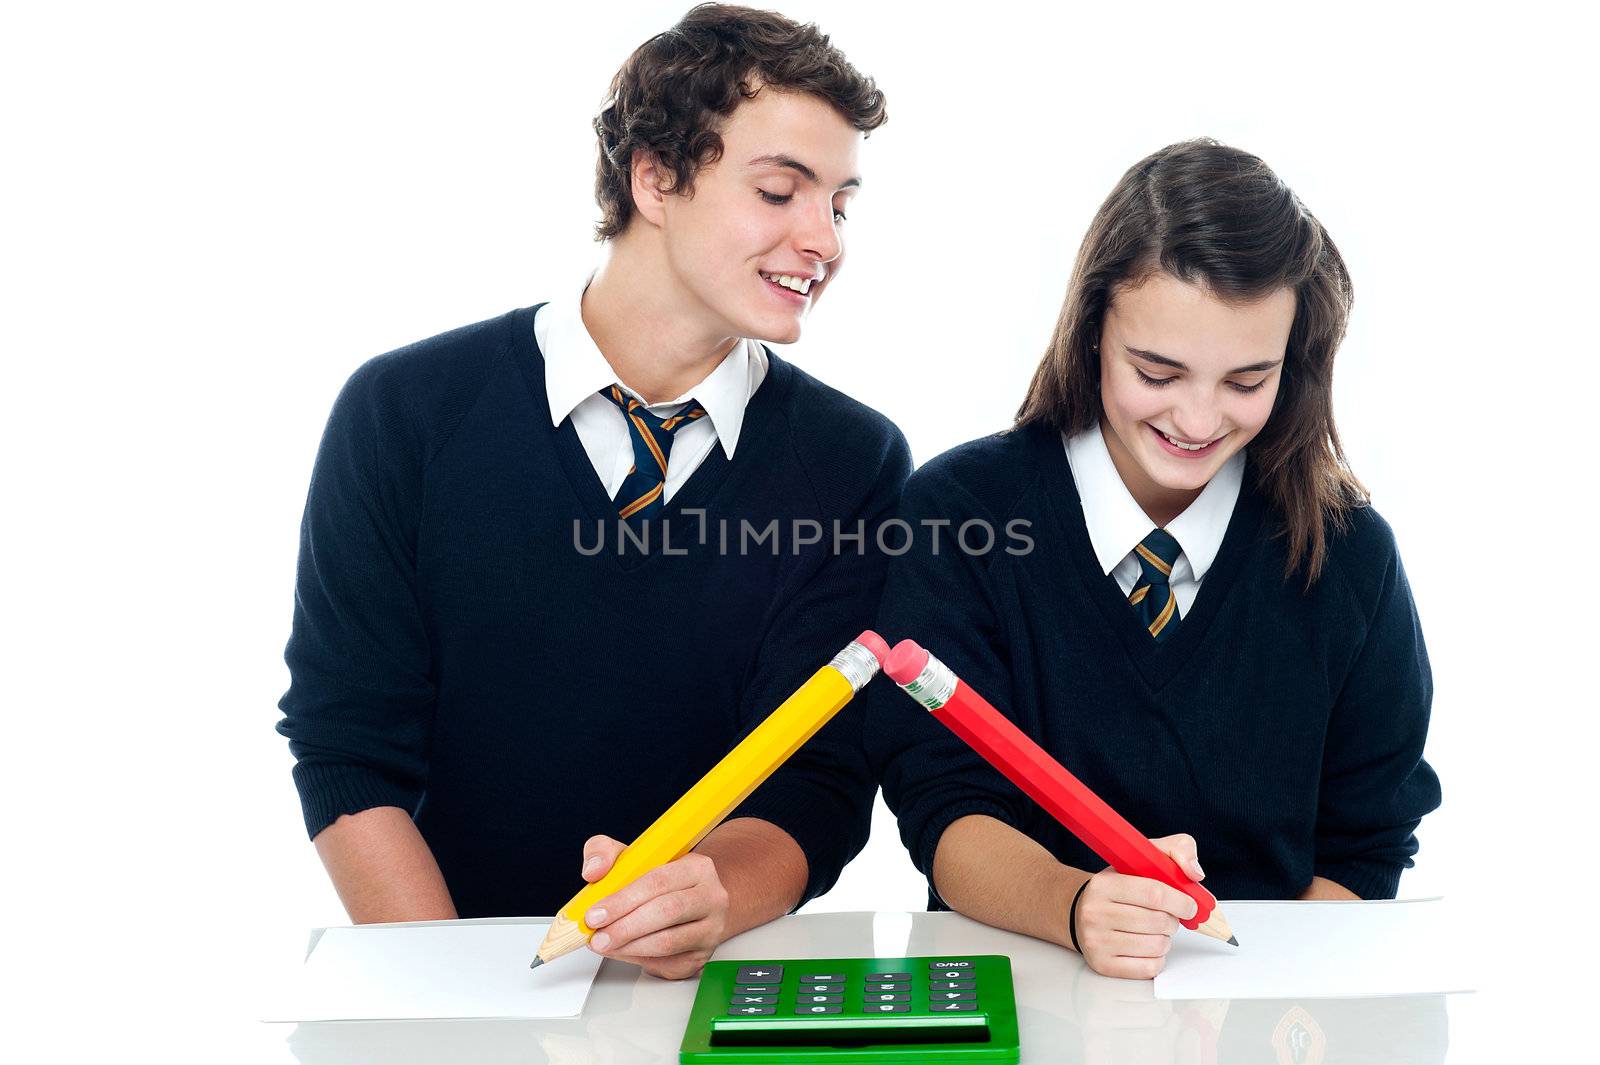 School boy copying from his fellow student during examination